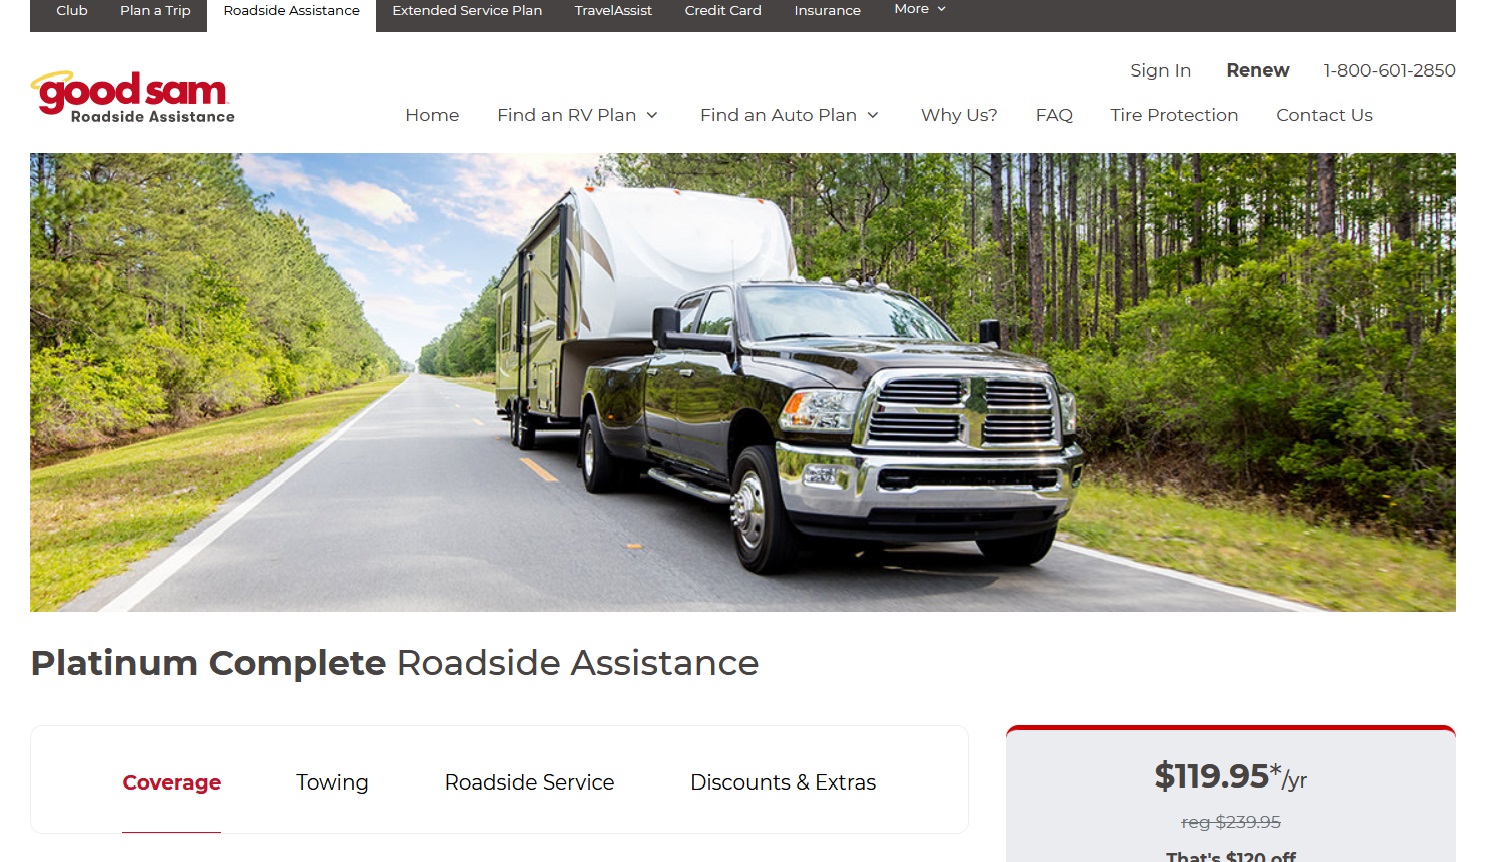 Good Sam offers members the option to buy a roadside assistance plan.